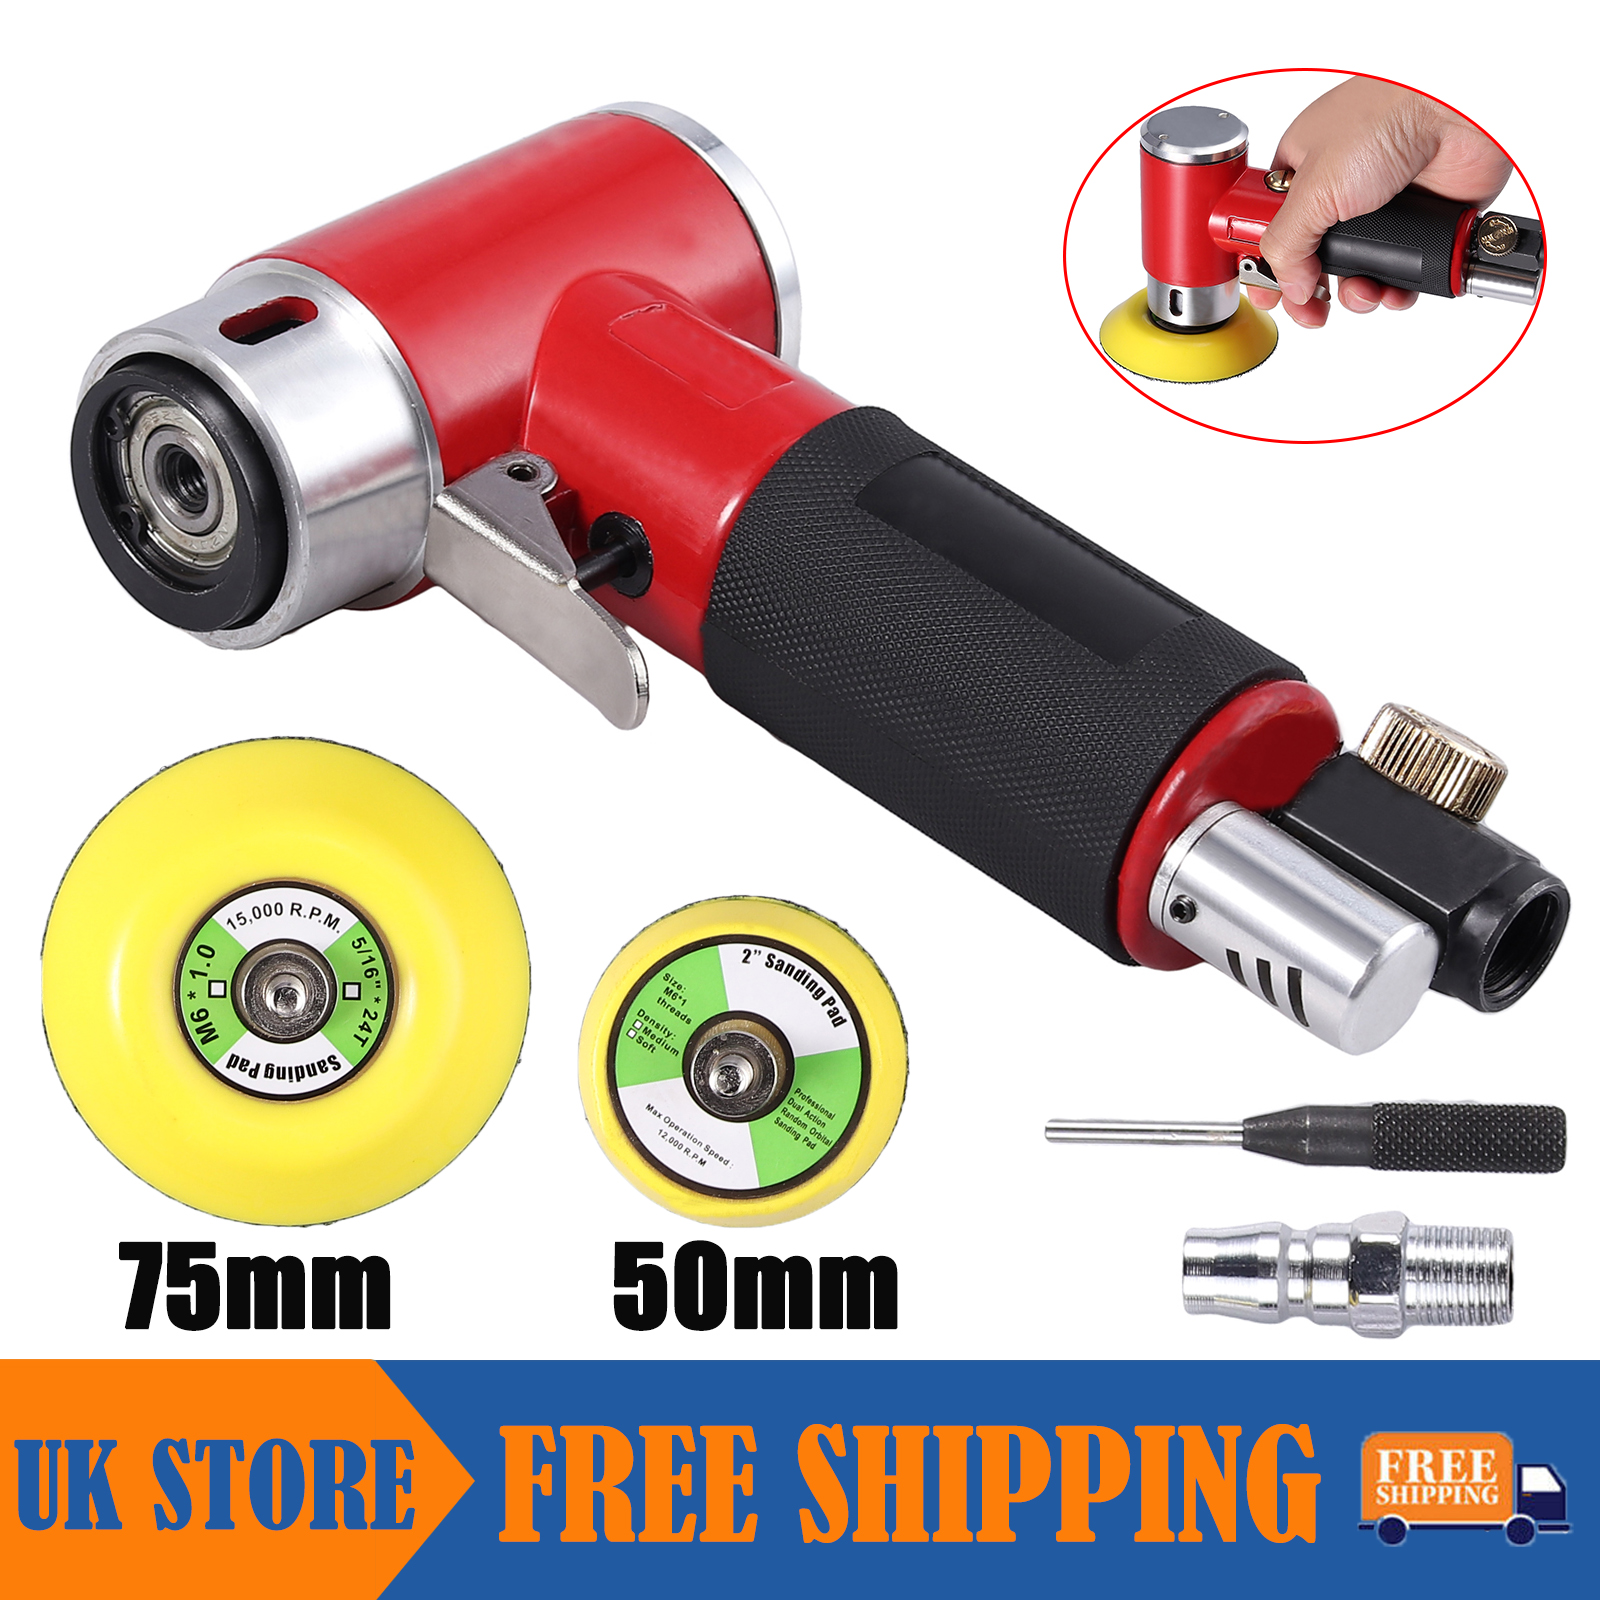 HEAVY DUTY 15PC 1/4" AIR DIE RIGHT ANGLE GRINDER POLISHER SANDER KIT UK